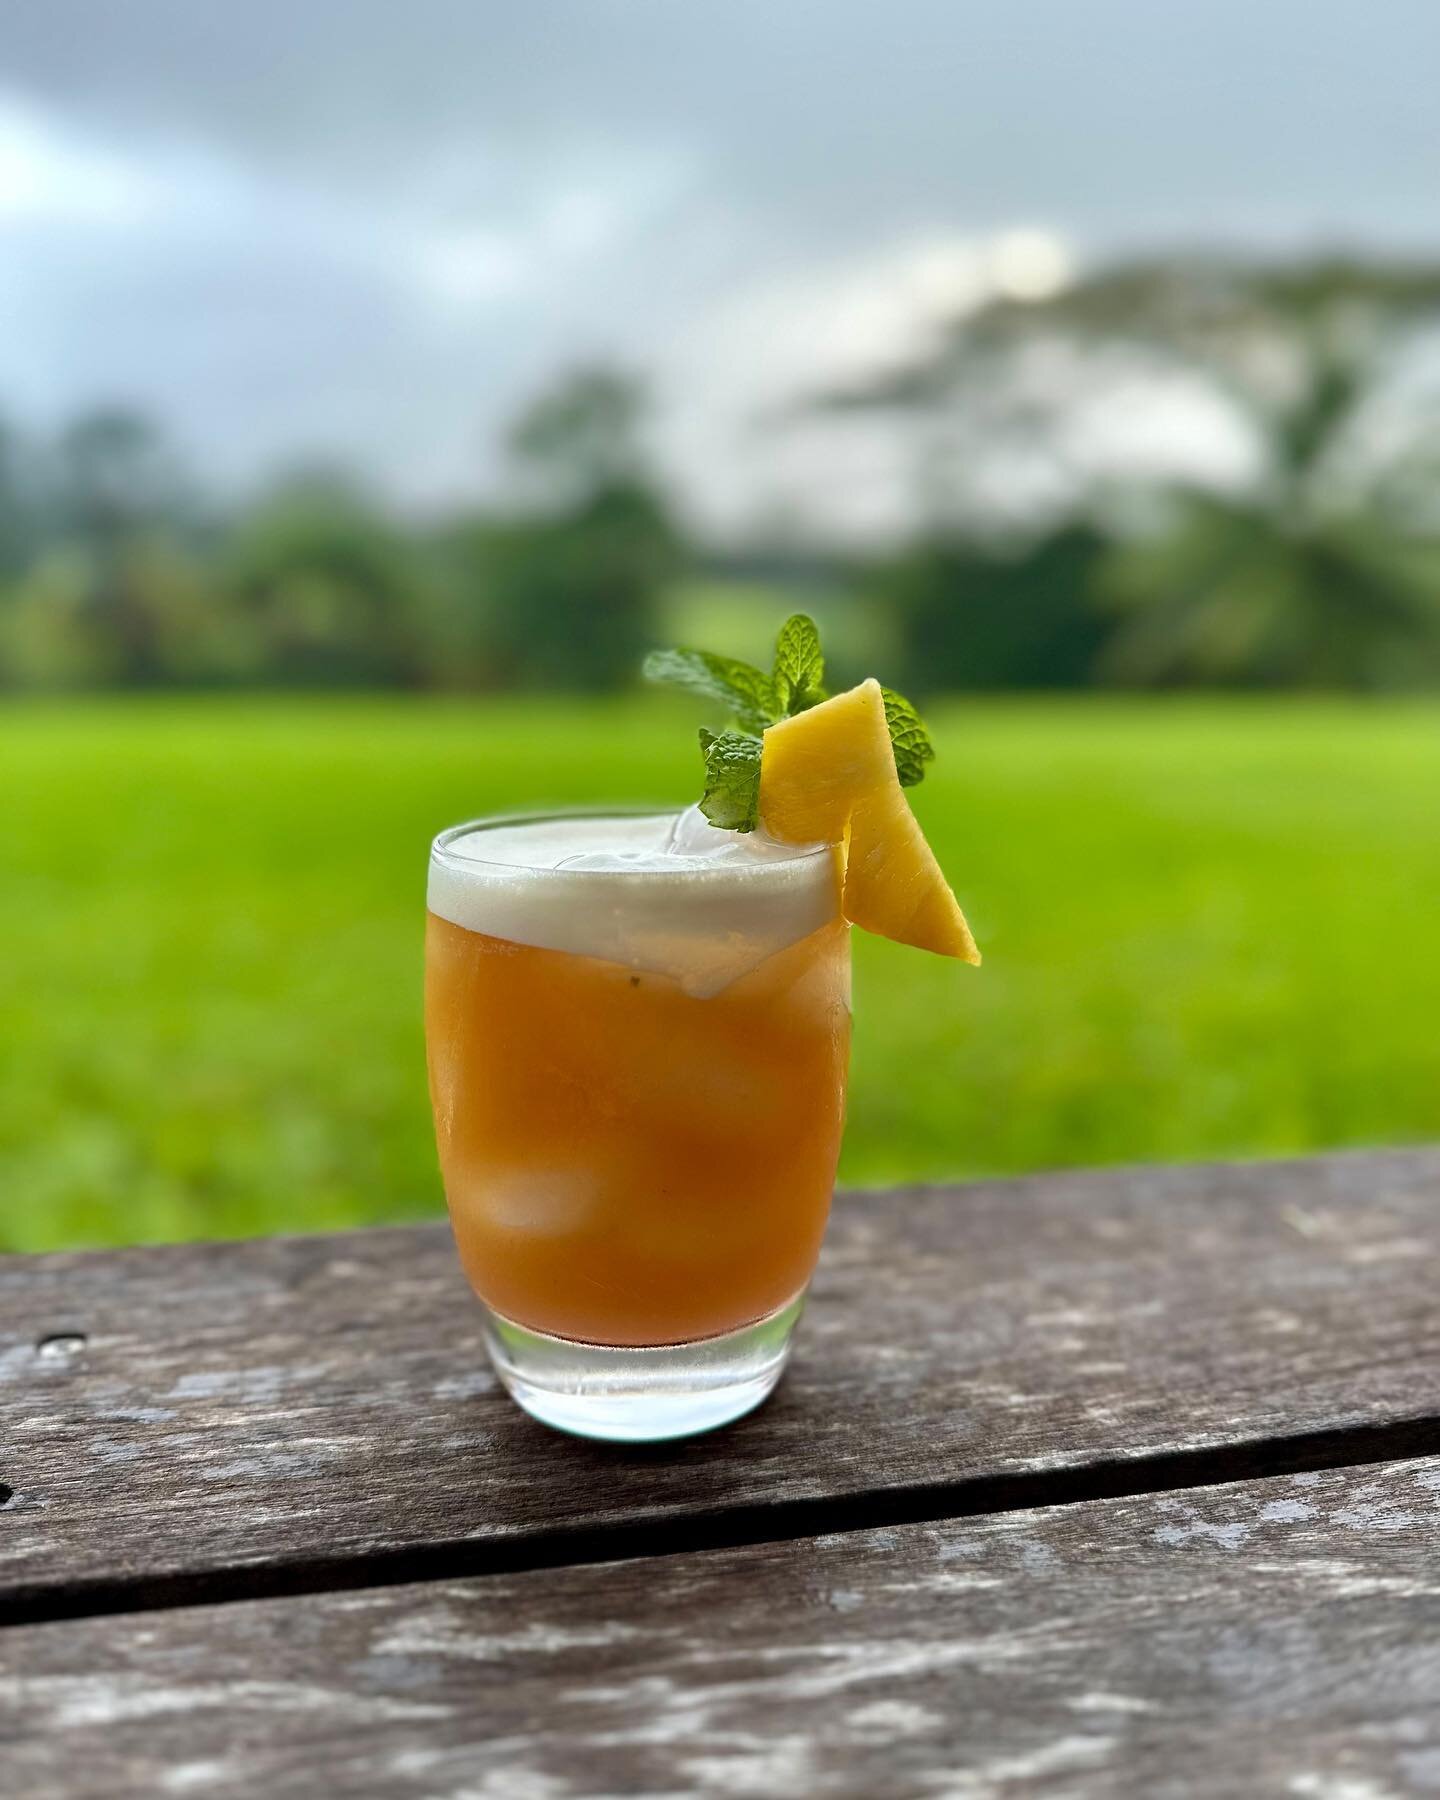 Happy Hummmmppppp Day! 

Introducing: &ldquo;Tropic Thunder&rdquo;

A truly tropical cocktail, if you can get your paws on keffir lime, it&rsquo;ll really make this one special! Guava juice could be substituted for many other fruit/tropical juices if